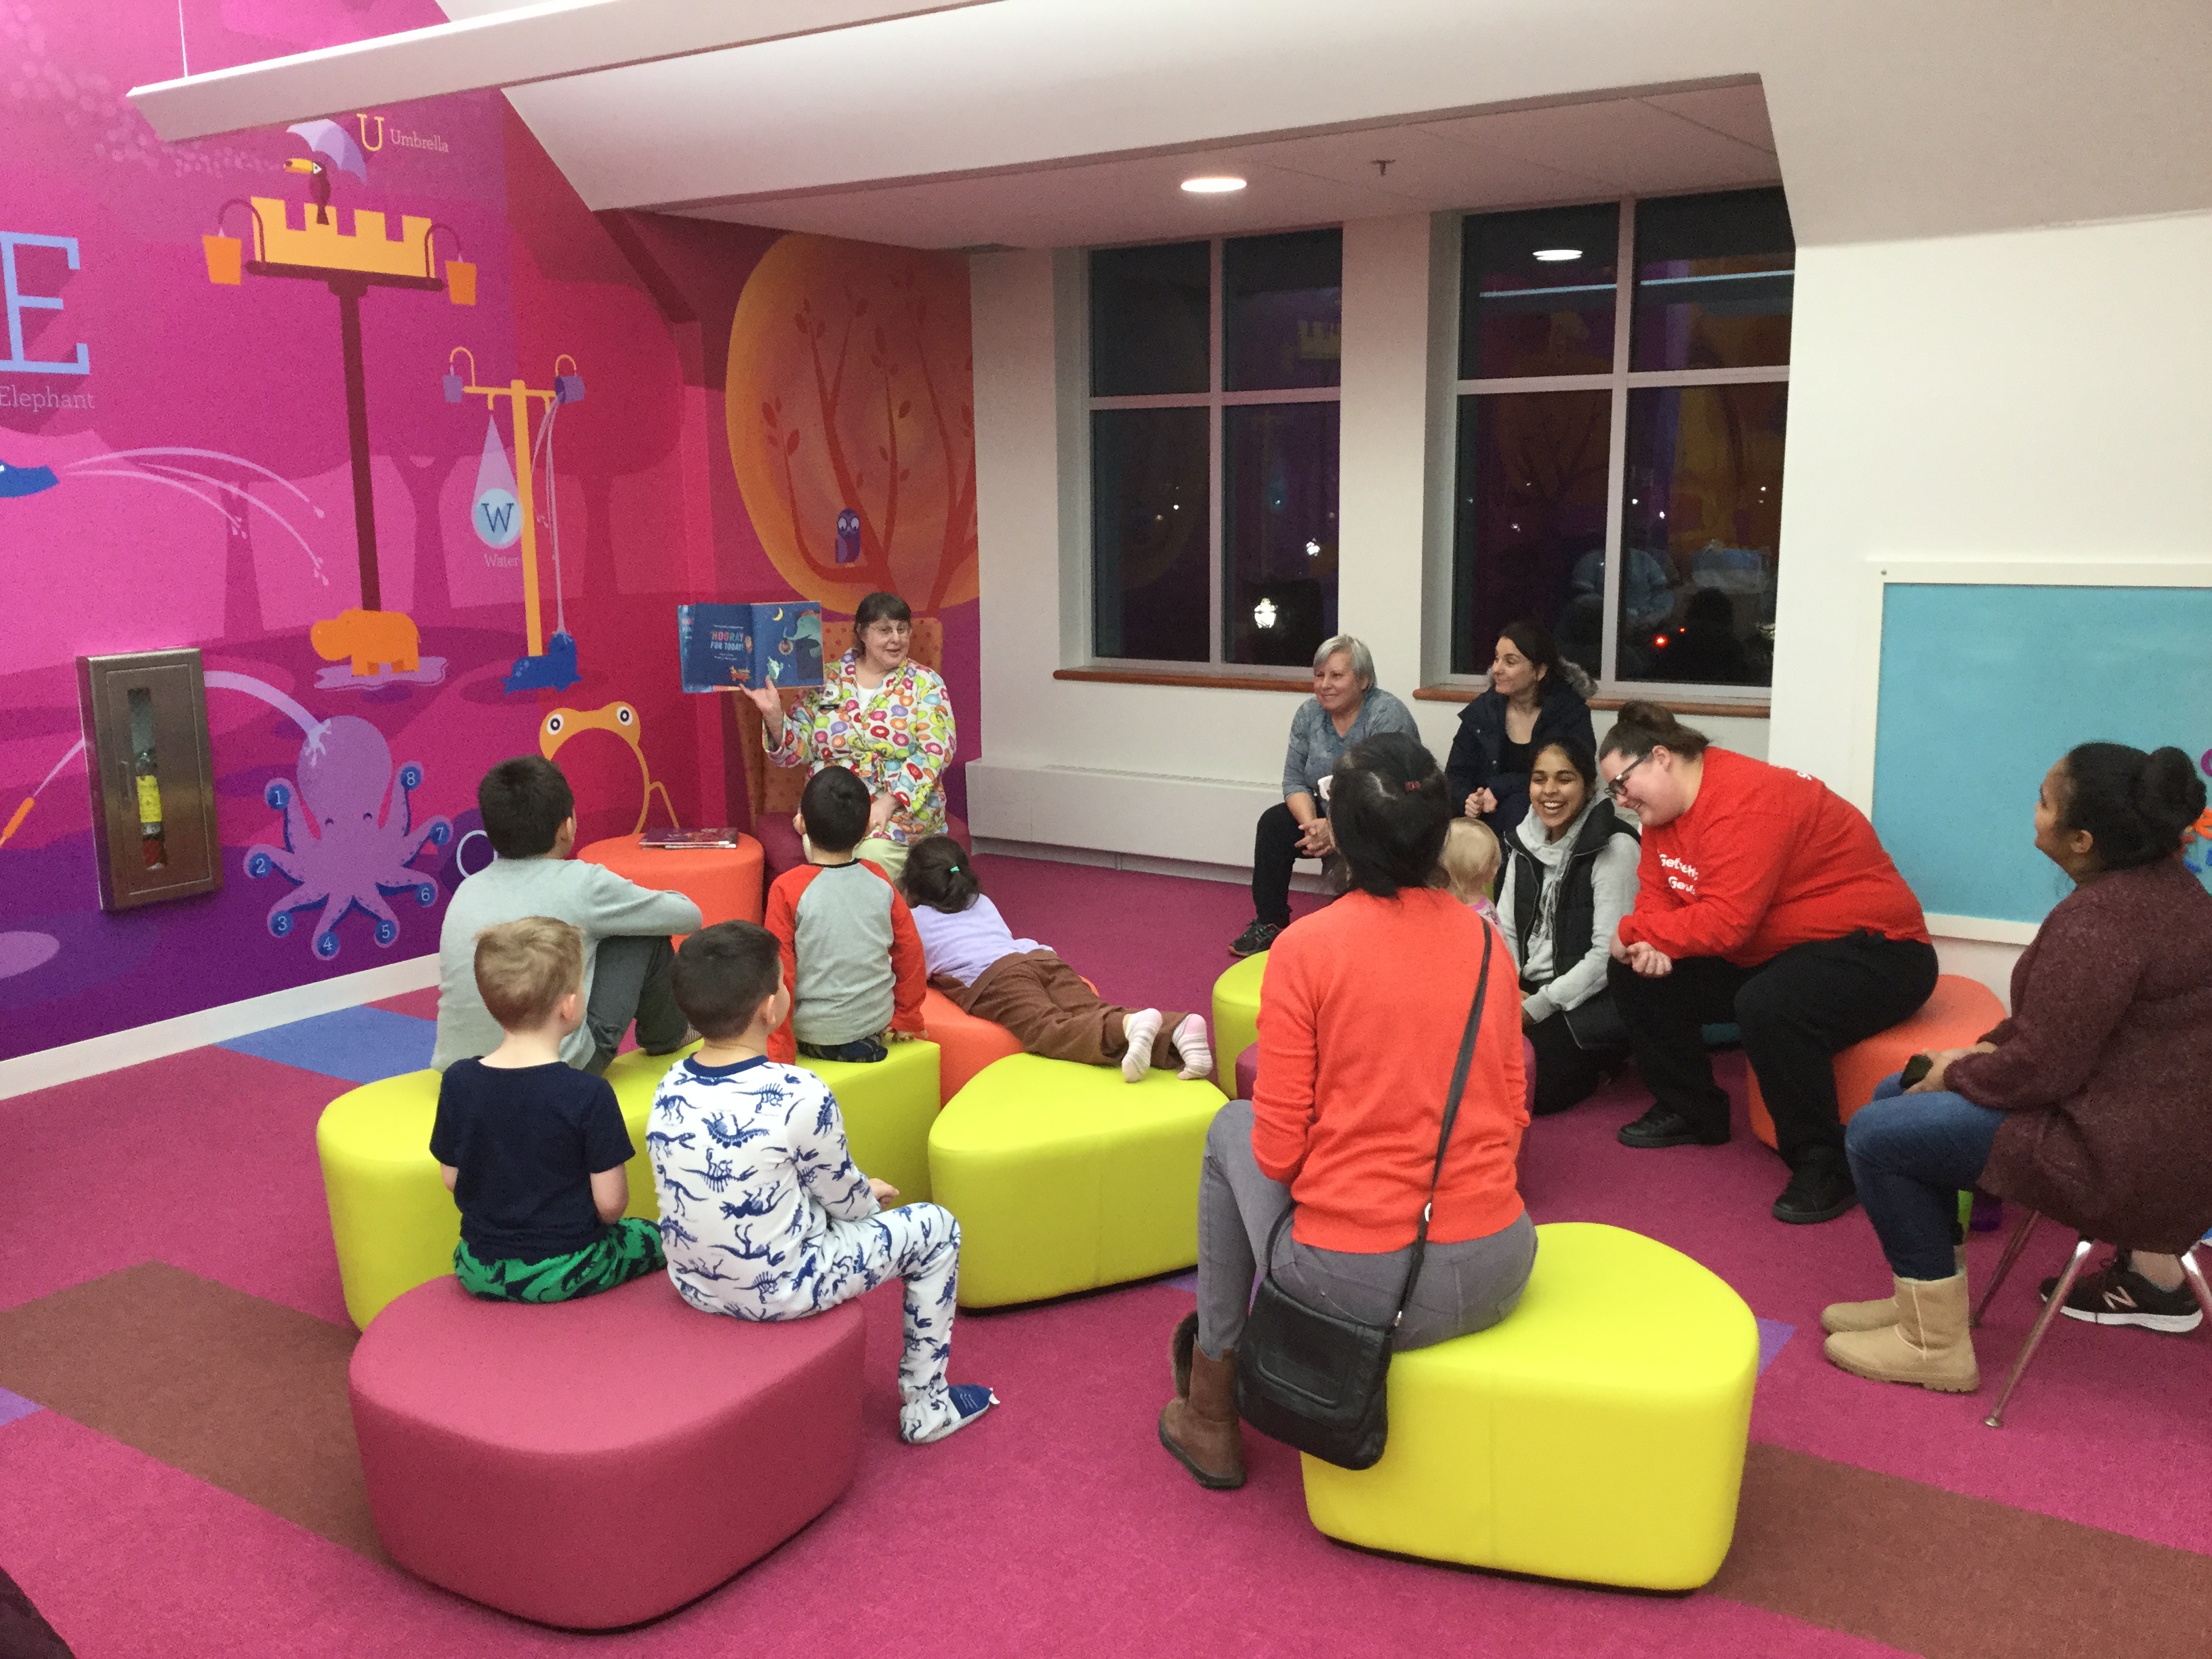 Families in Children's Room with Children's Librarian reading a story, some children in pajamas